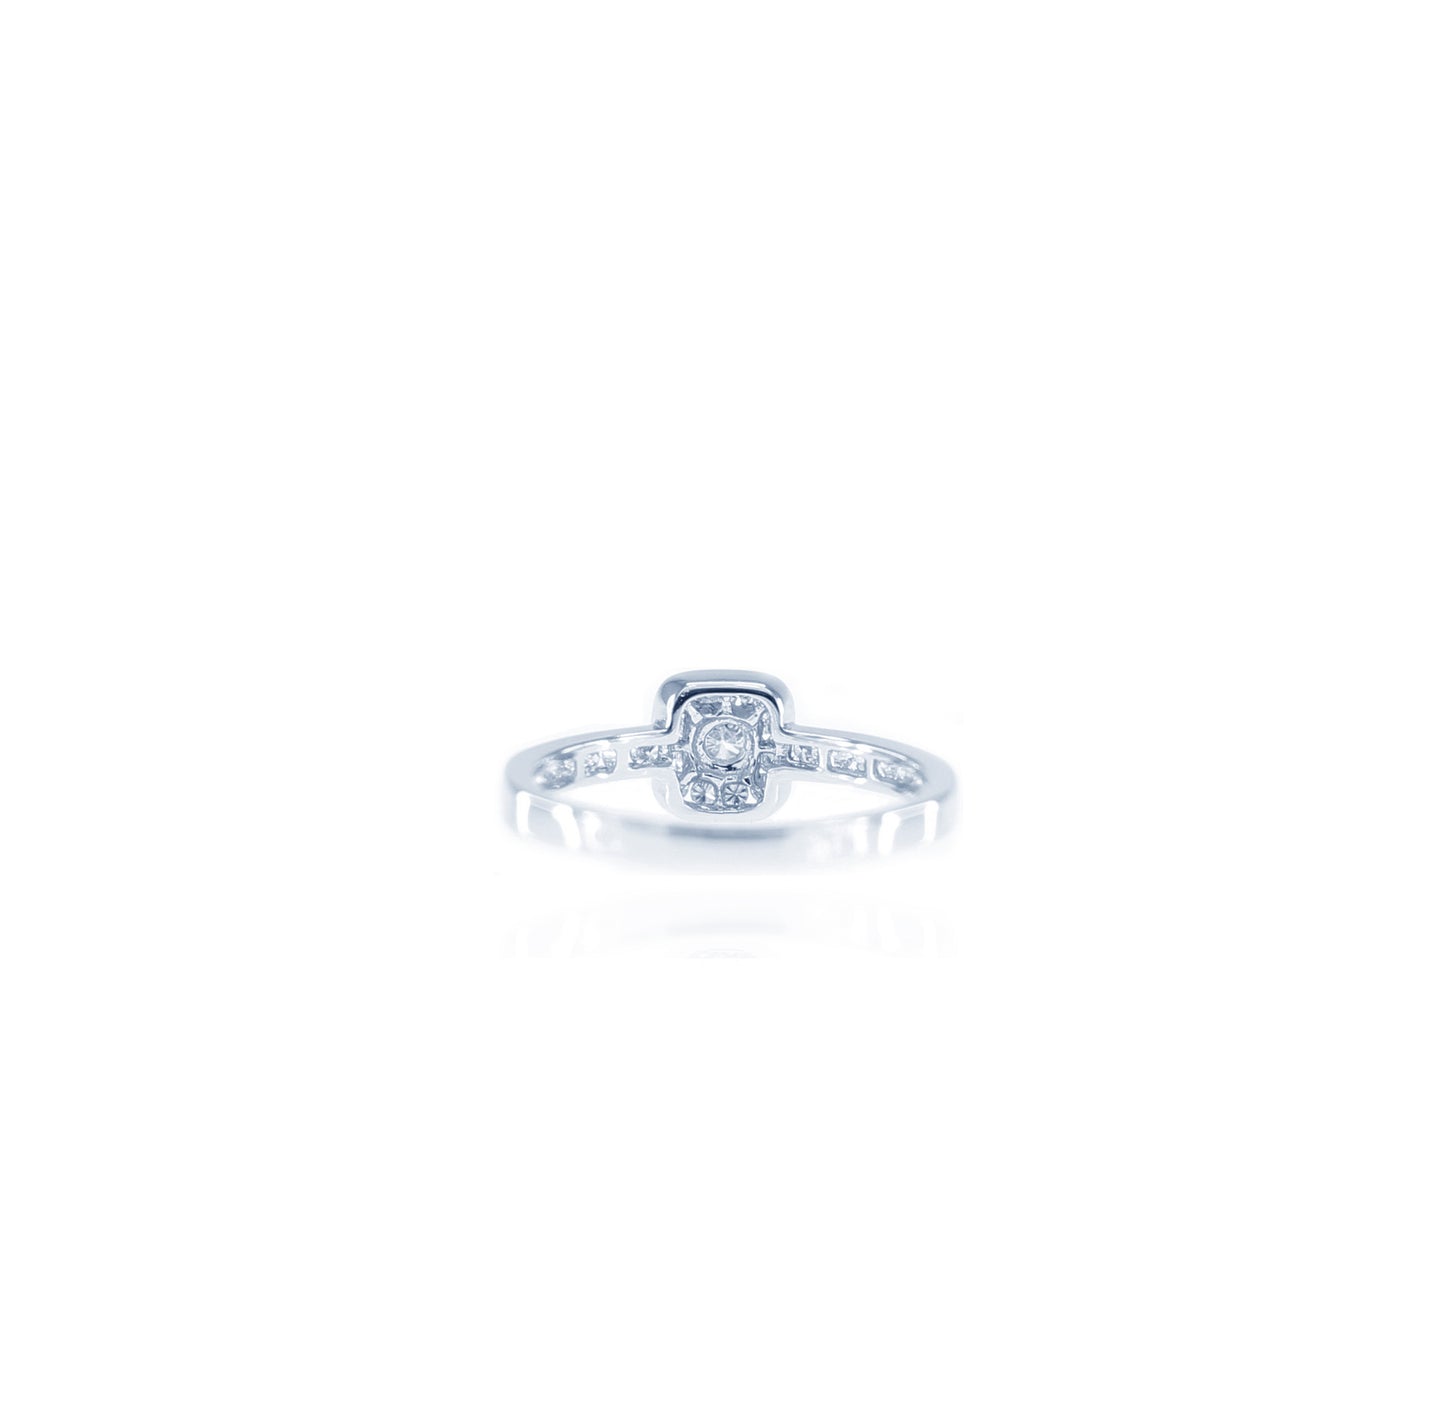 Square Shaped Diamond Halo Ring in 18K White Gold